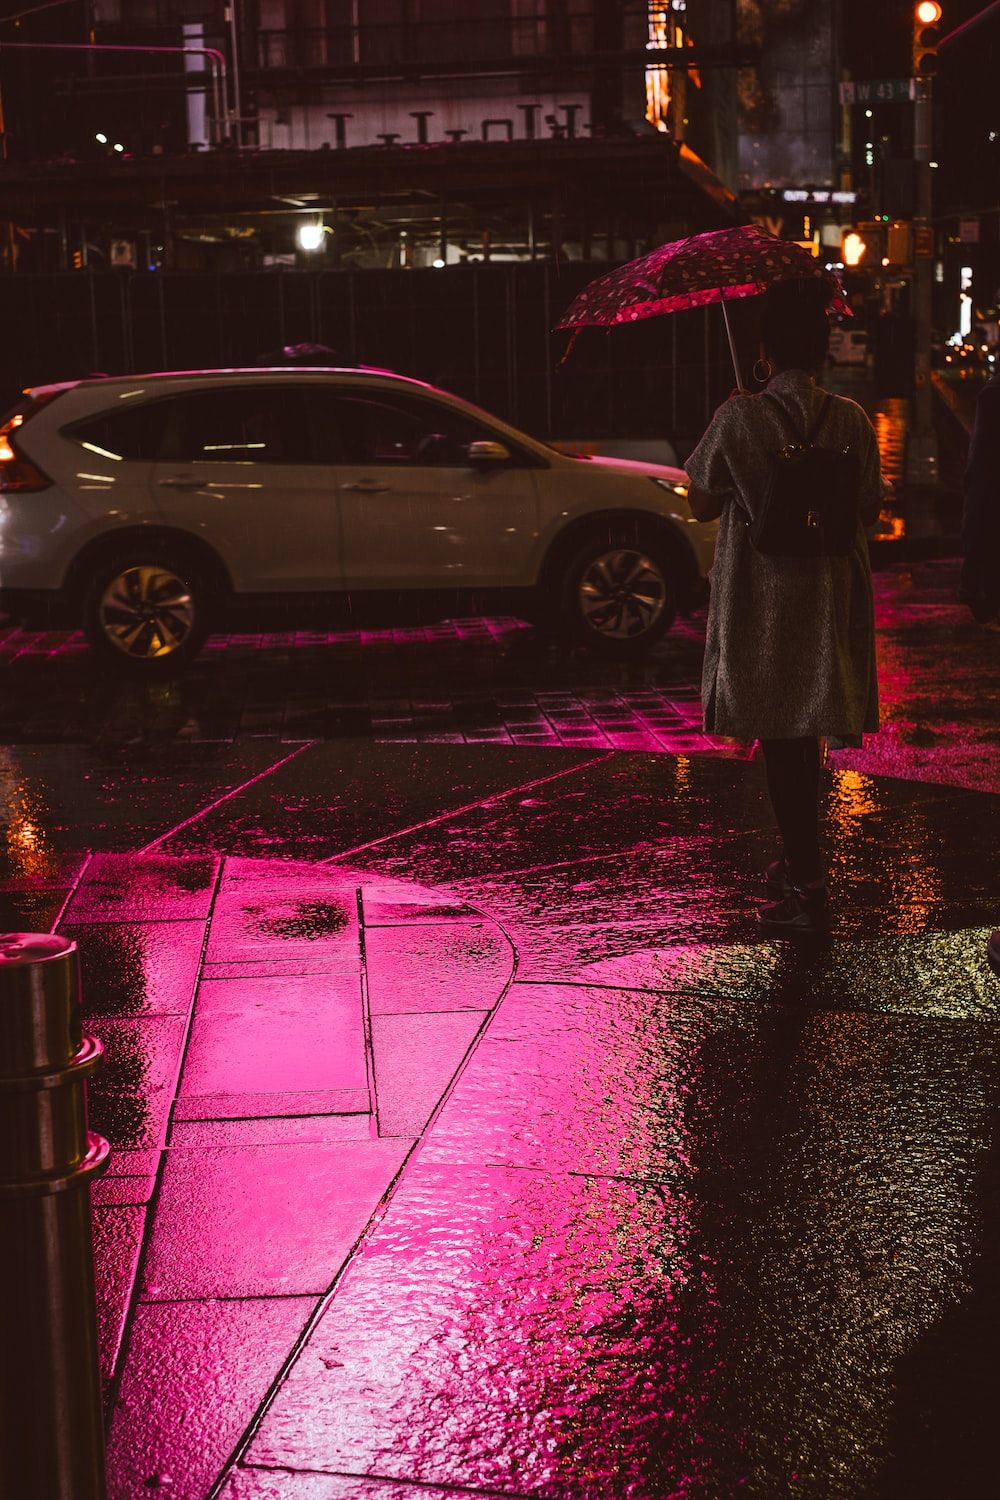 A person walking down the street with an umbrella - Sad